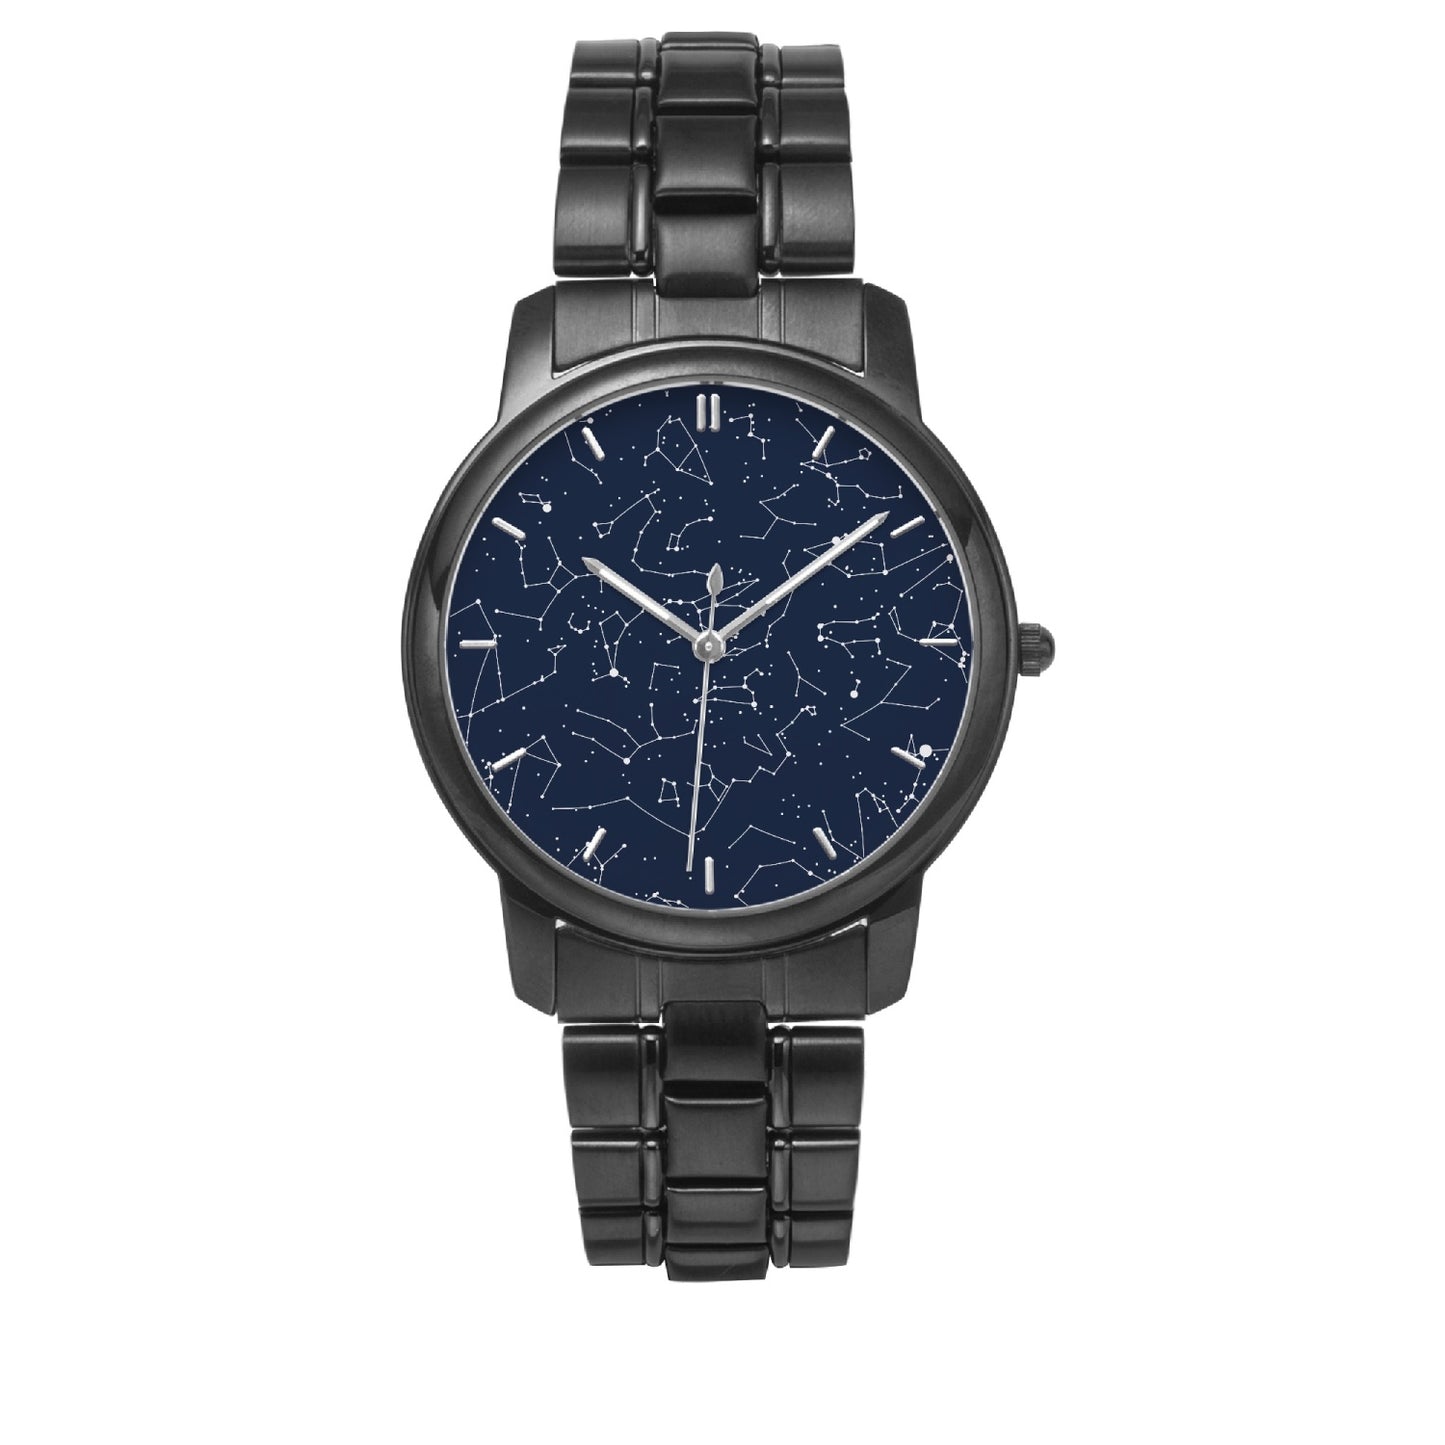 Anniversary Gift For Him, Personalized Star Map Folding Clasp Type Stainless Steel Quartz Watch Blue